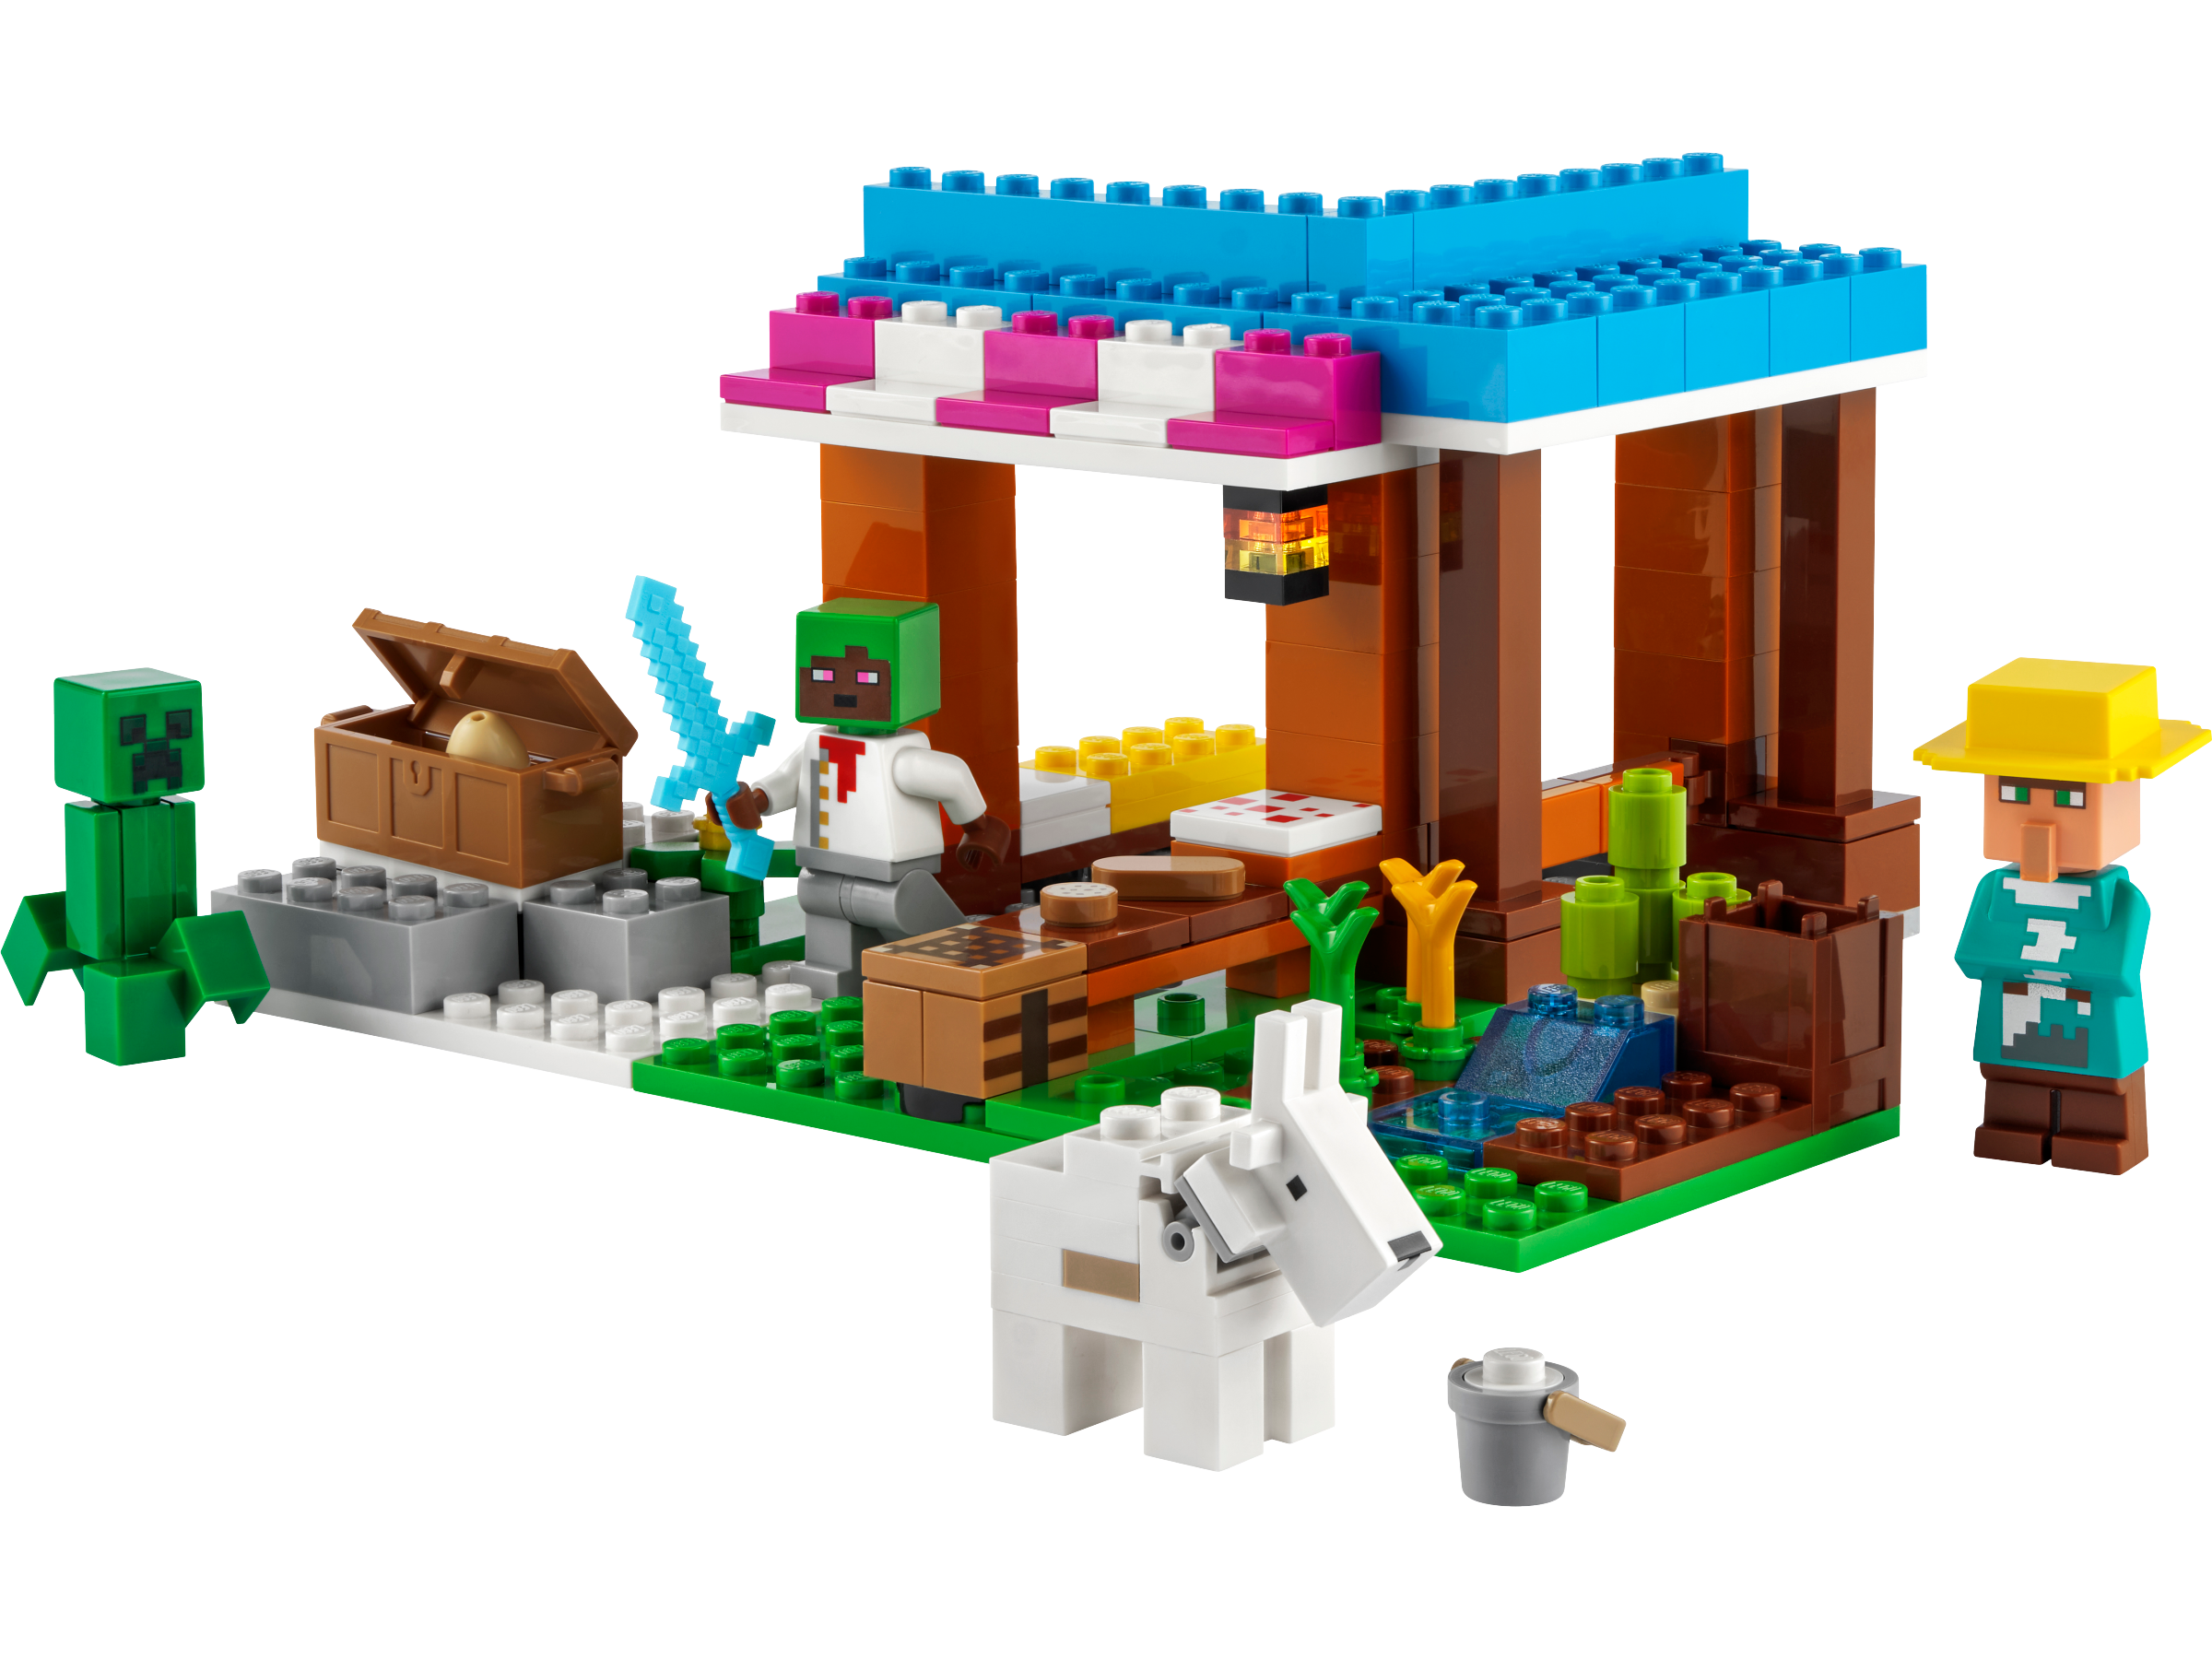 LEGO Minecraft The Bakery Building Kit 21184 Game-Inspired Minecraft Toy  Set for Kids Girls Boys Age 8+ Featuring 3 Minecraft Figures and Goat, with